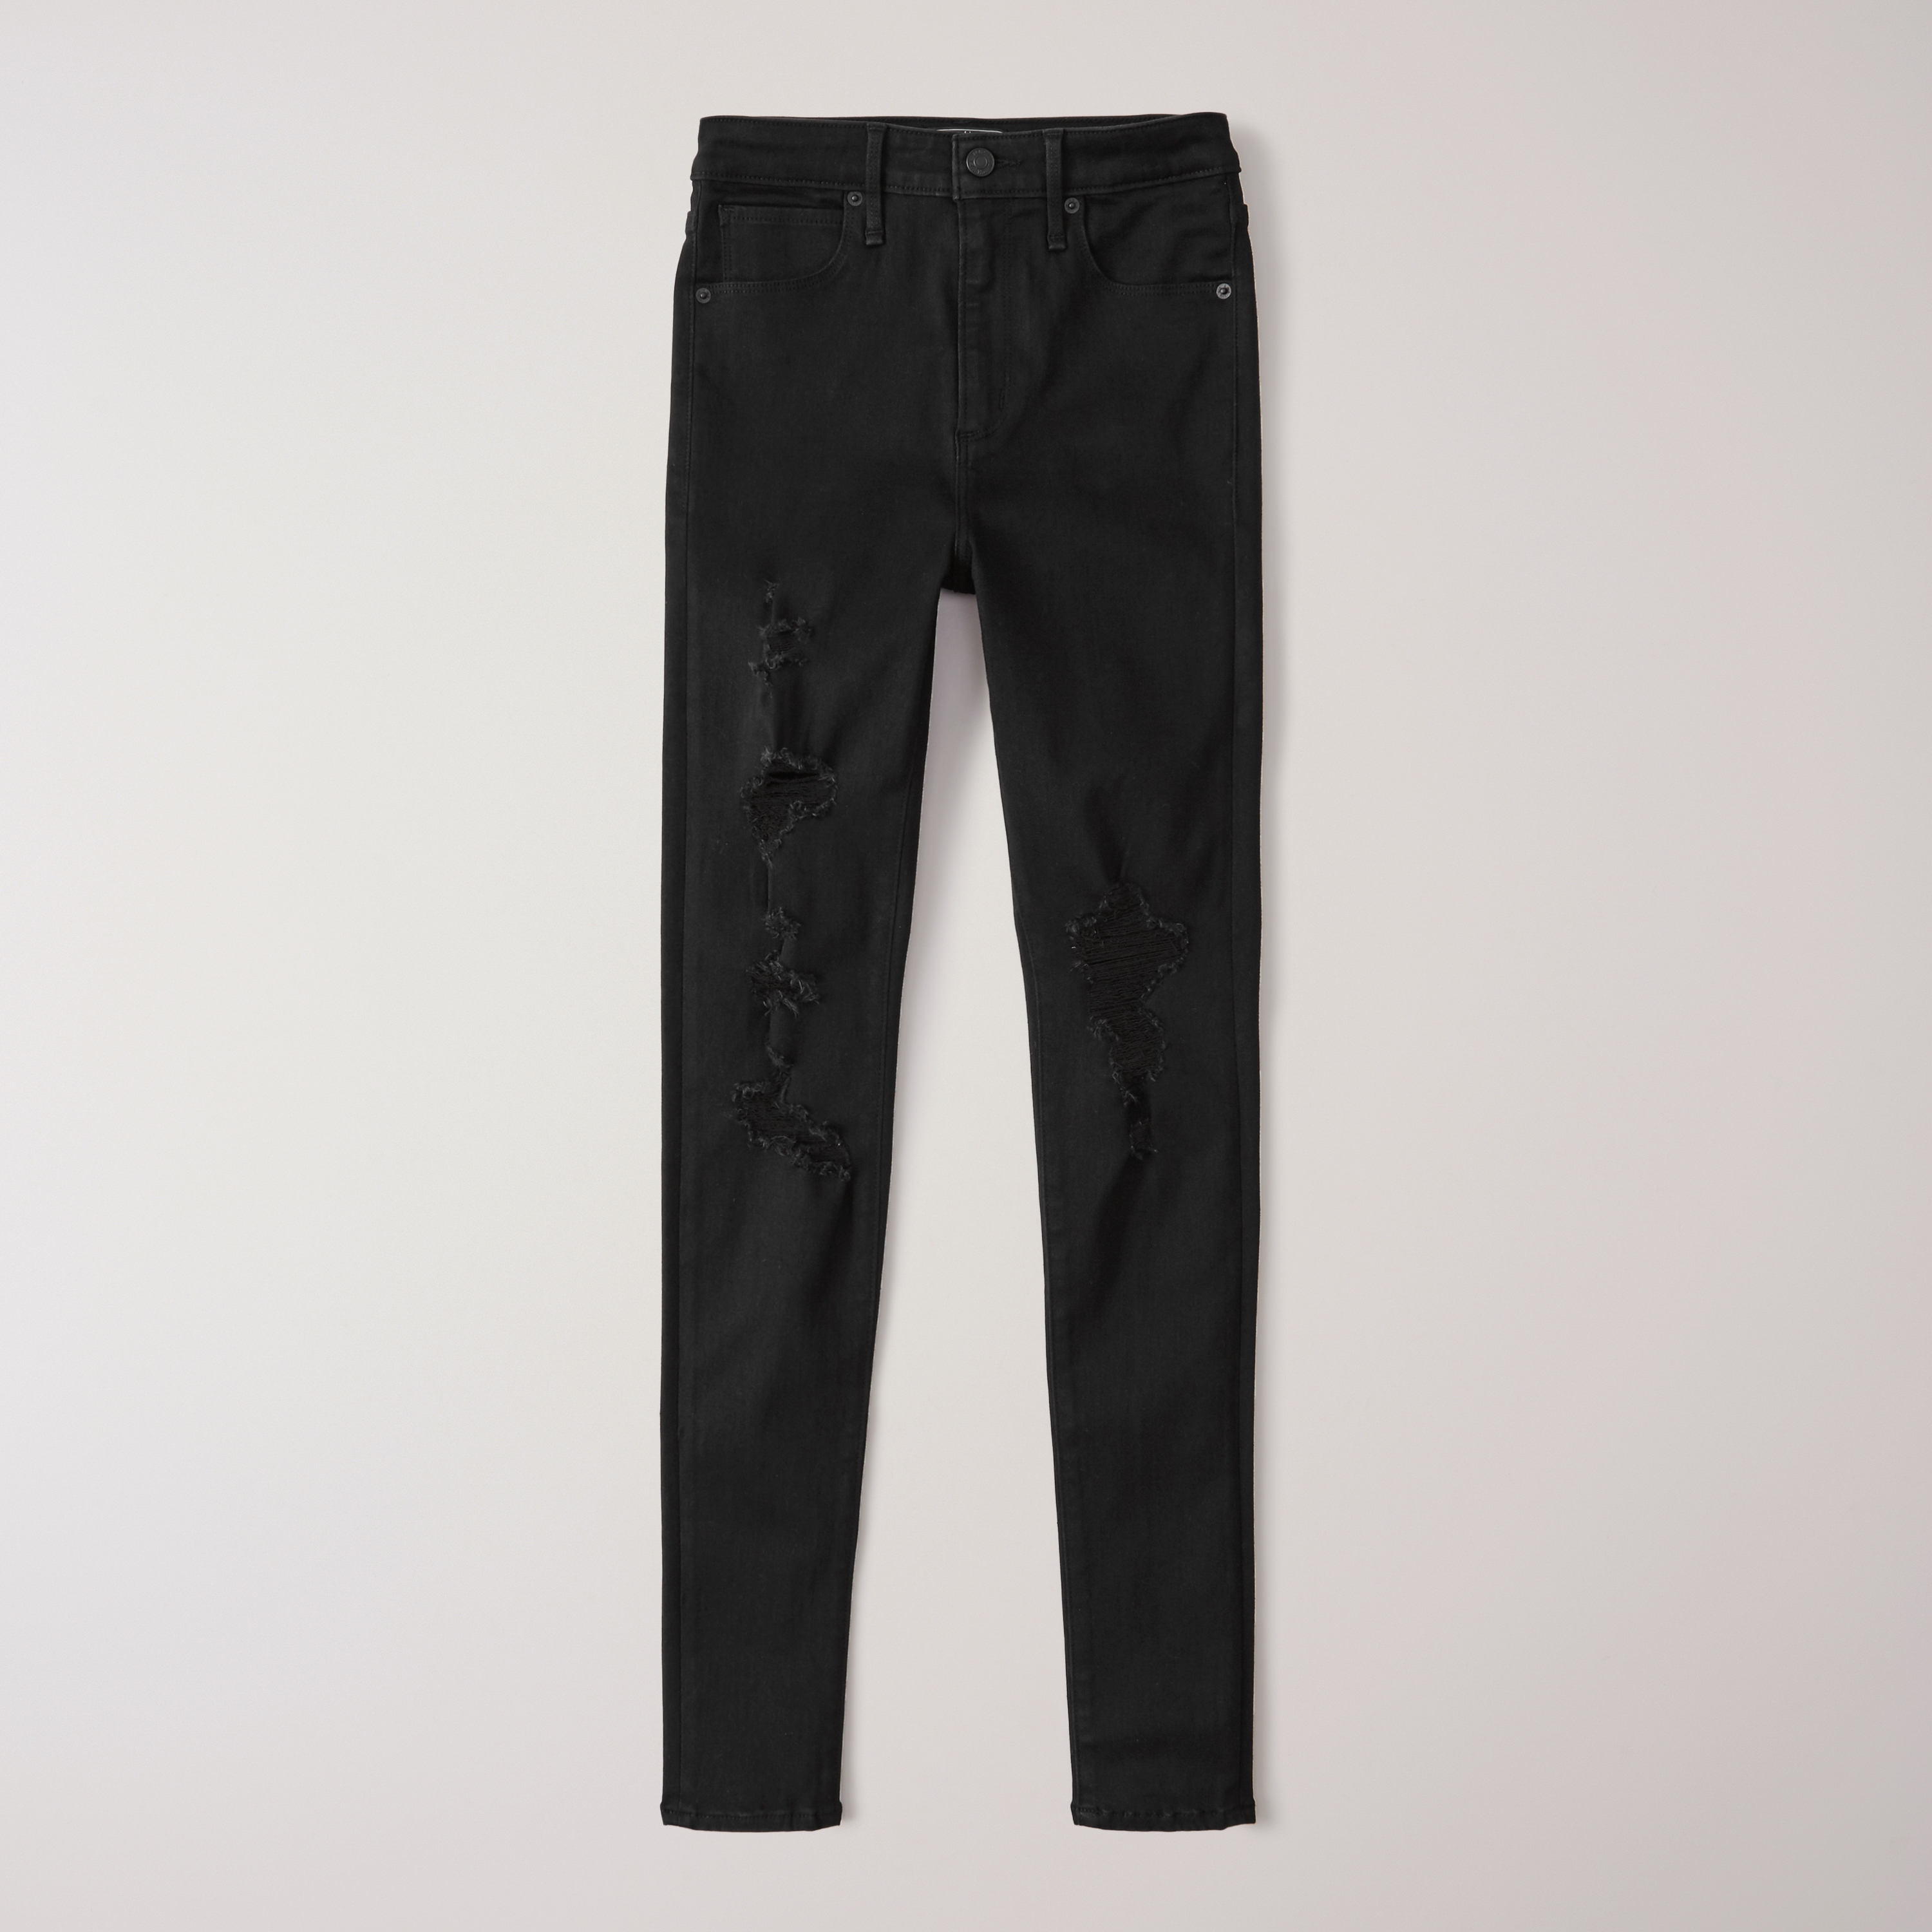 abercrombie and fitch black jeans